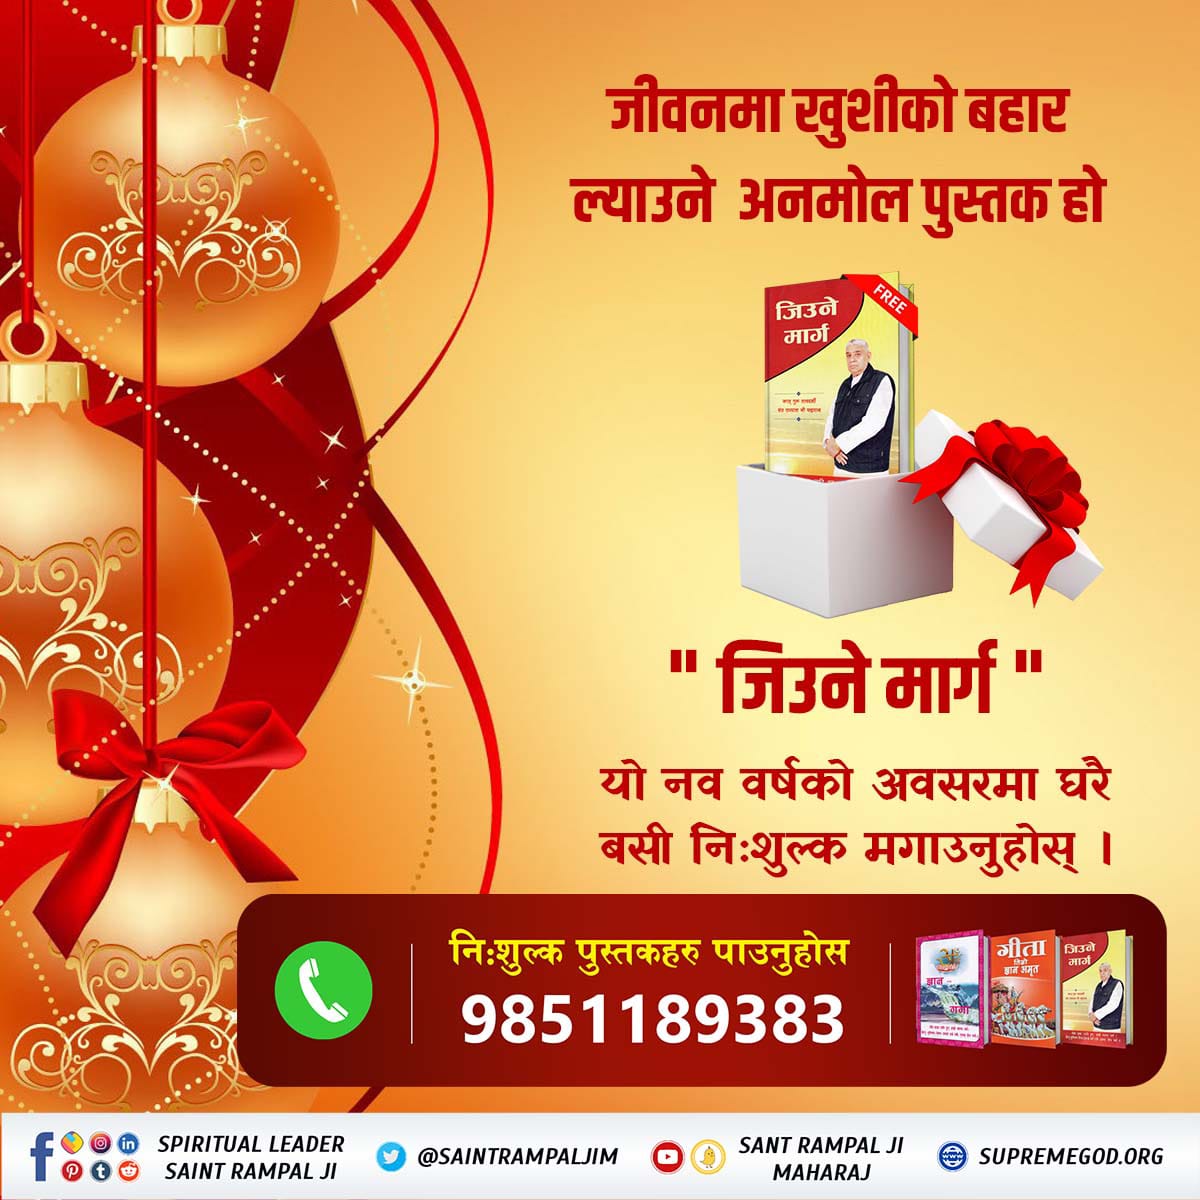 @Nirmaladhakal44 #नयाँवर्षमा_जीवनको_नयाँयात्रा In the New Year, bring the book 'Way of Living' in your home, which by reading it, the divine will reside in your home and spirits and ghosts will not be able to come near that house and family. All the quarrels in the house will end.